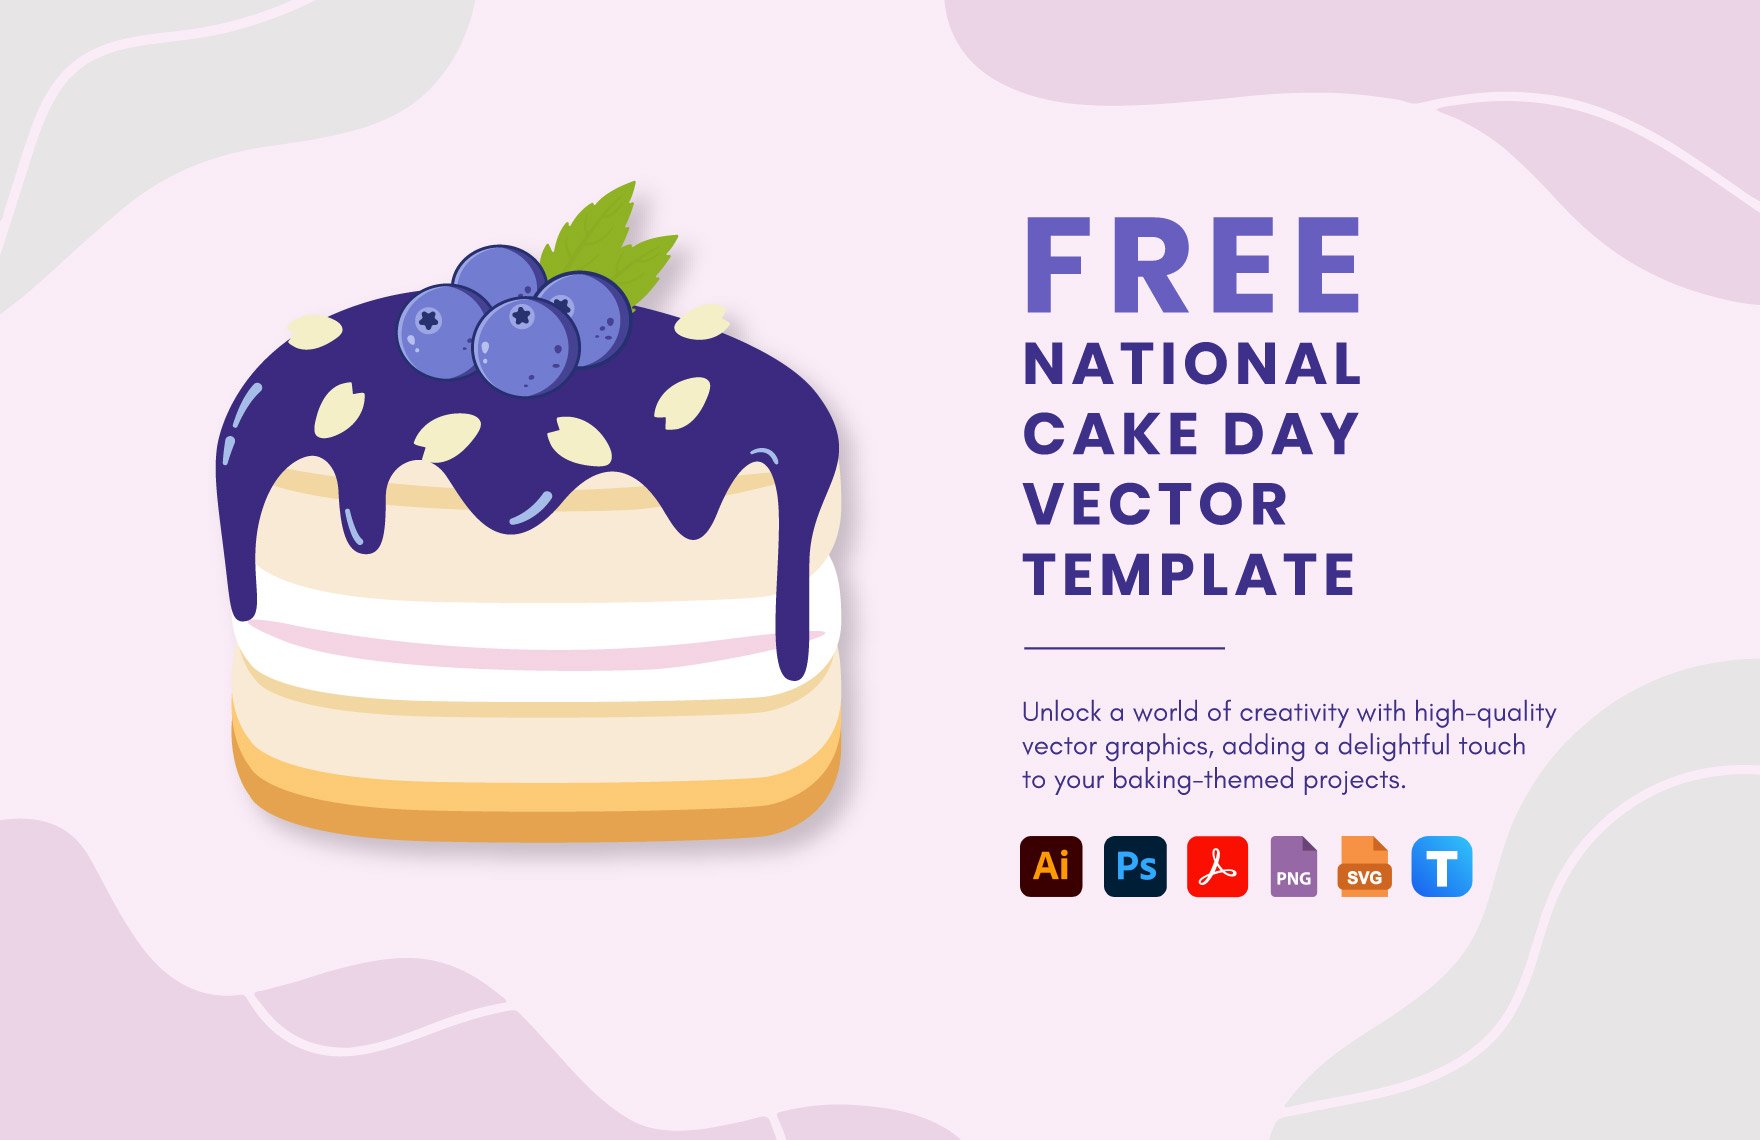 National Cake Day Vector